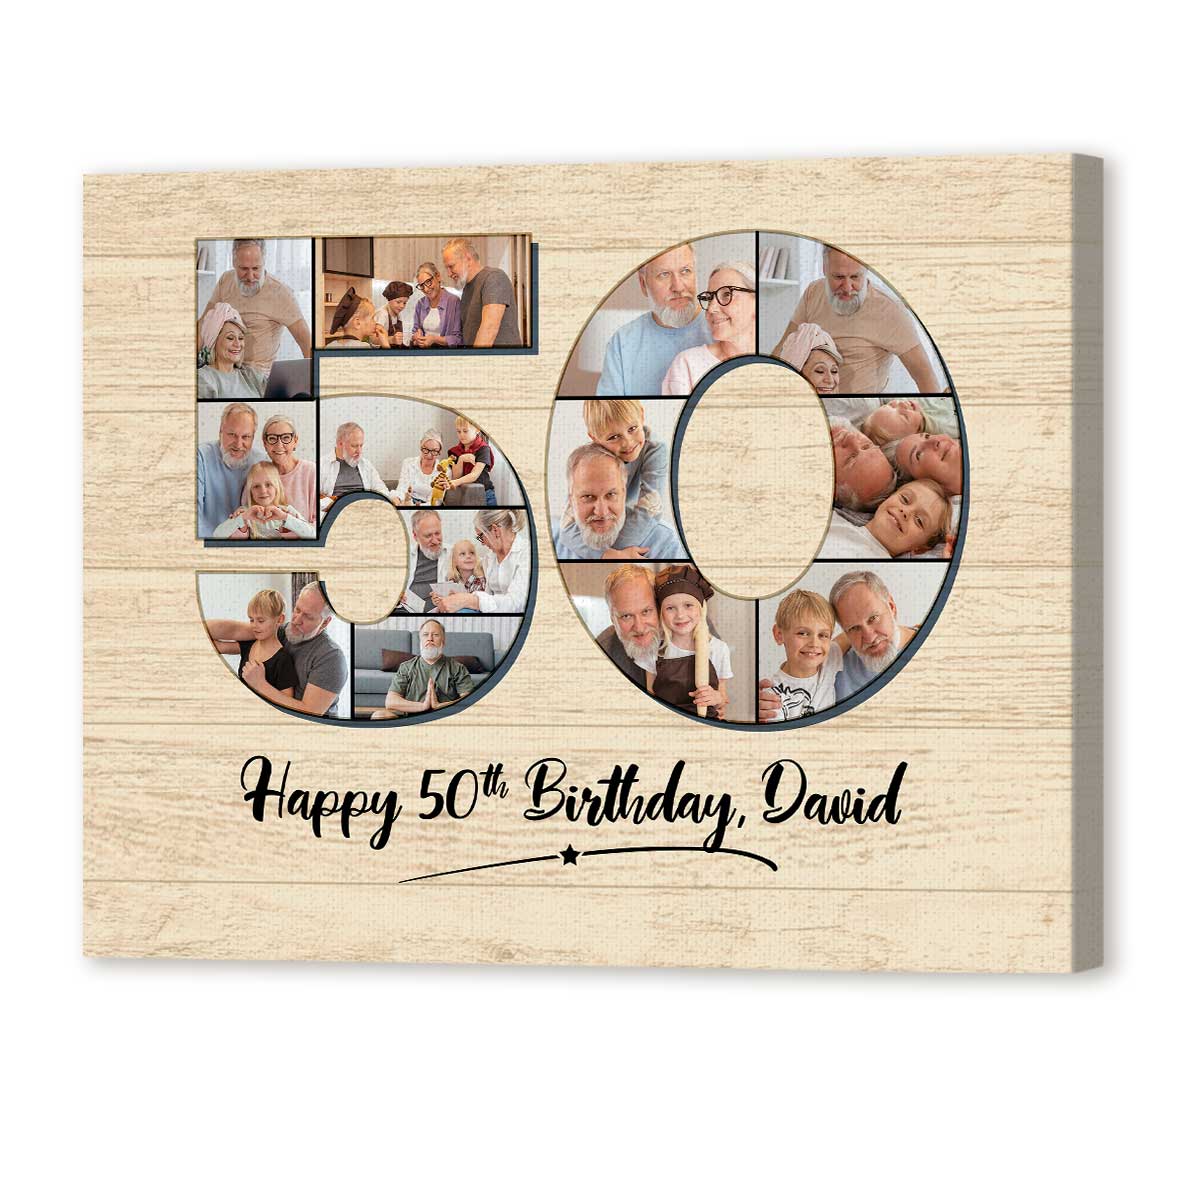 Personalized 50th Birthday Gift For Men For Dad, 50th Birthday Custom Photo Collage Canvas, 50th Birthday Gift Ideas